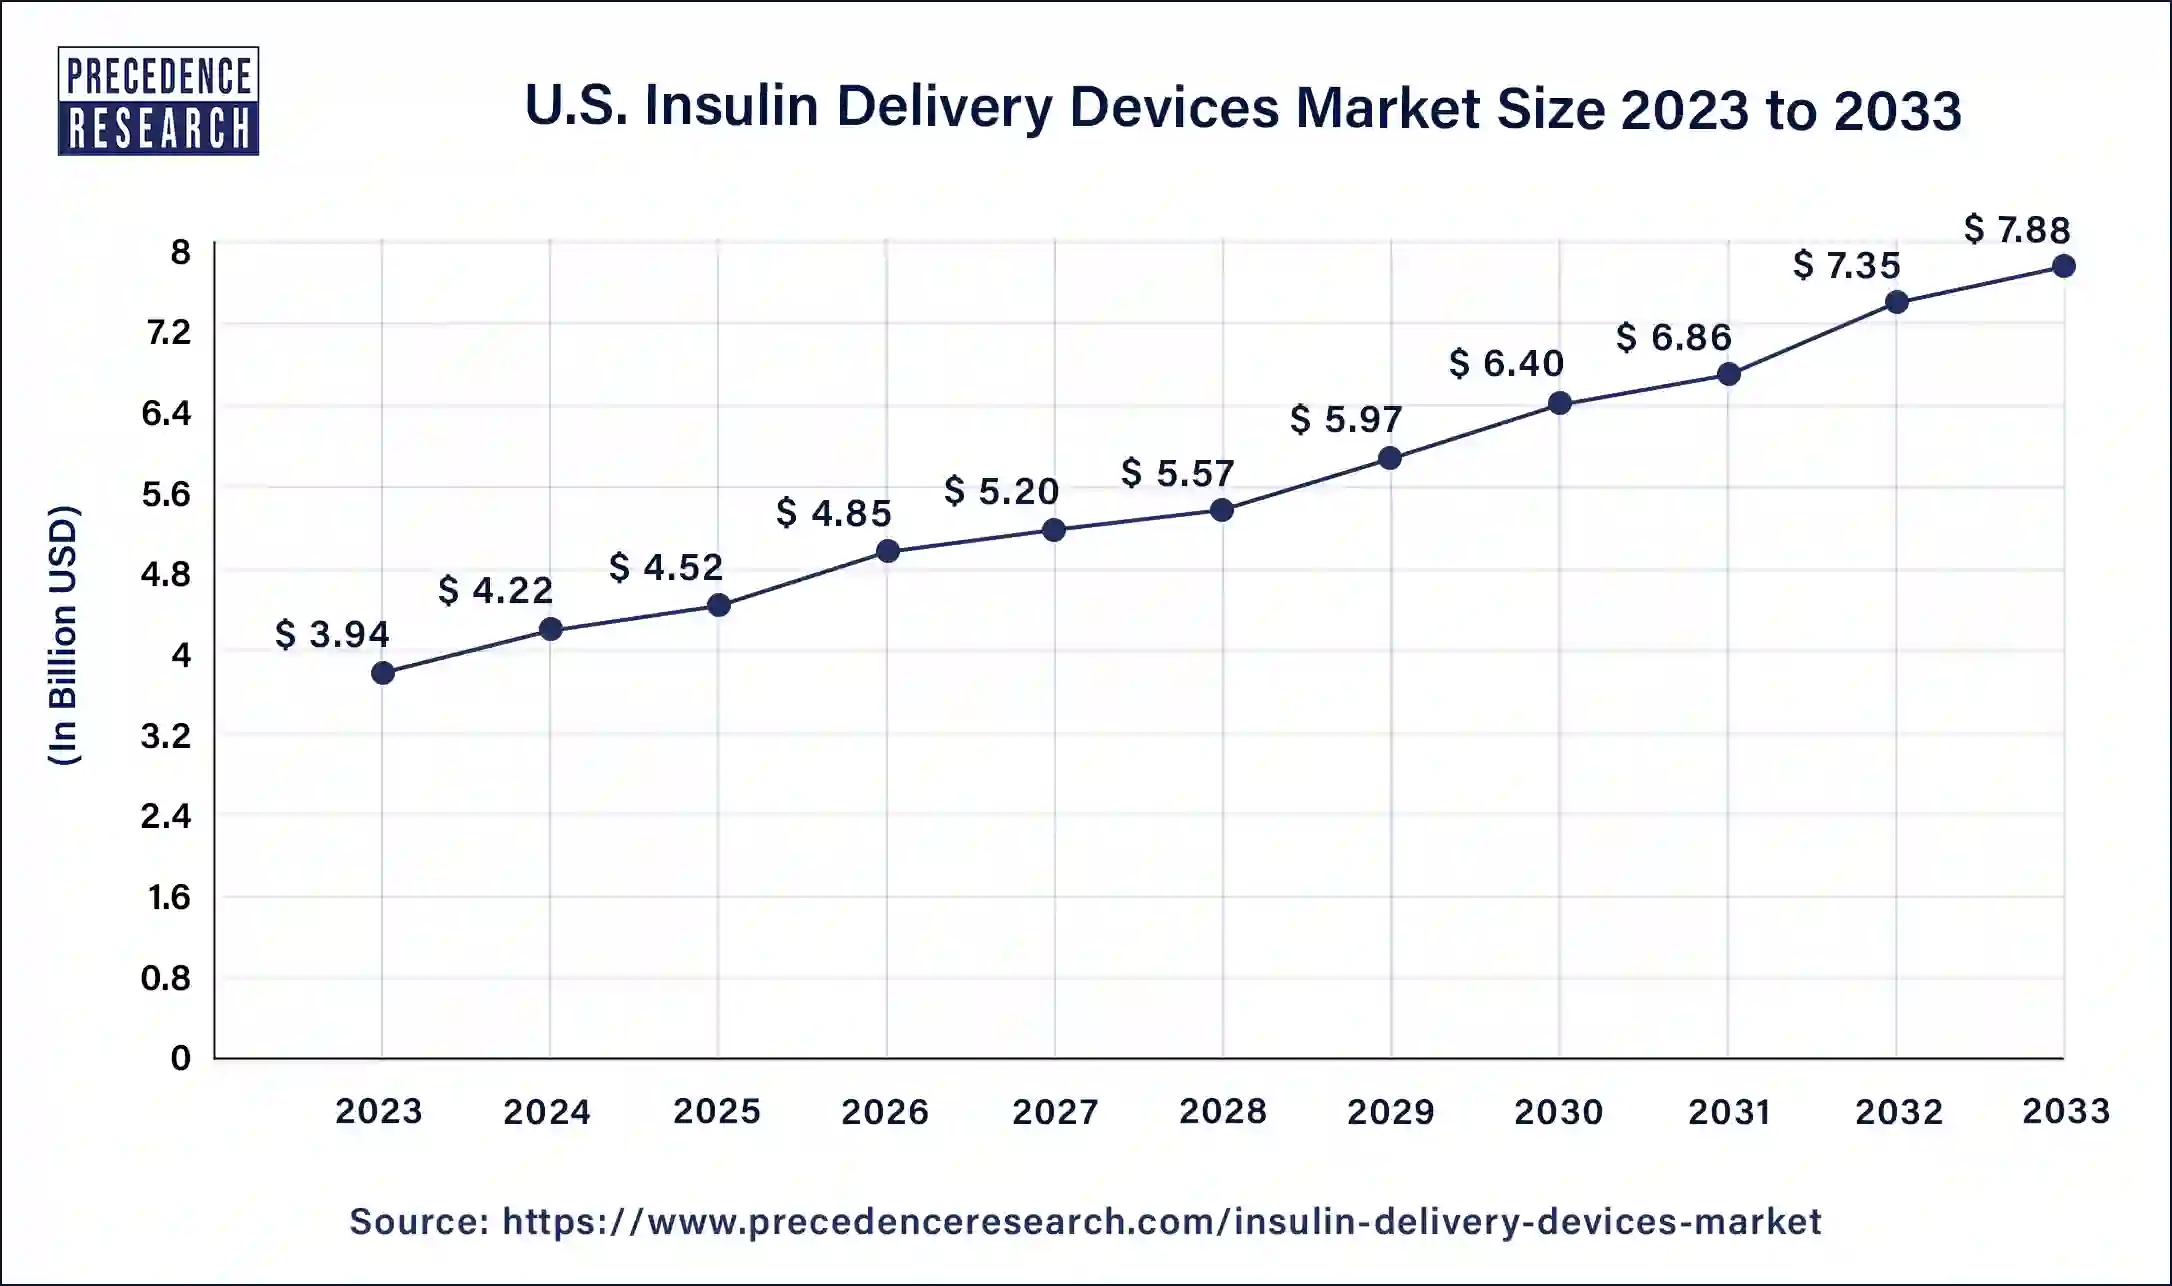 U.S. Insulin Delivery Devices Market Size 2024 to 2033